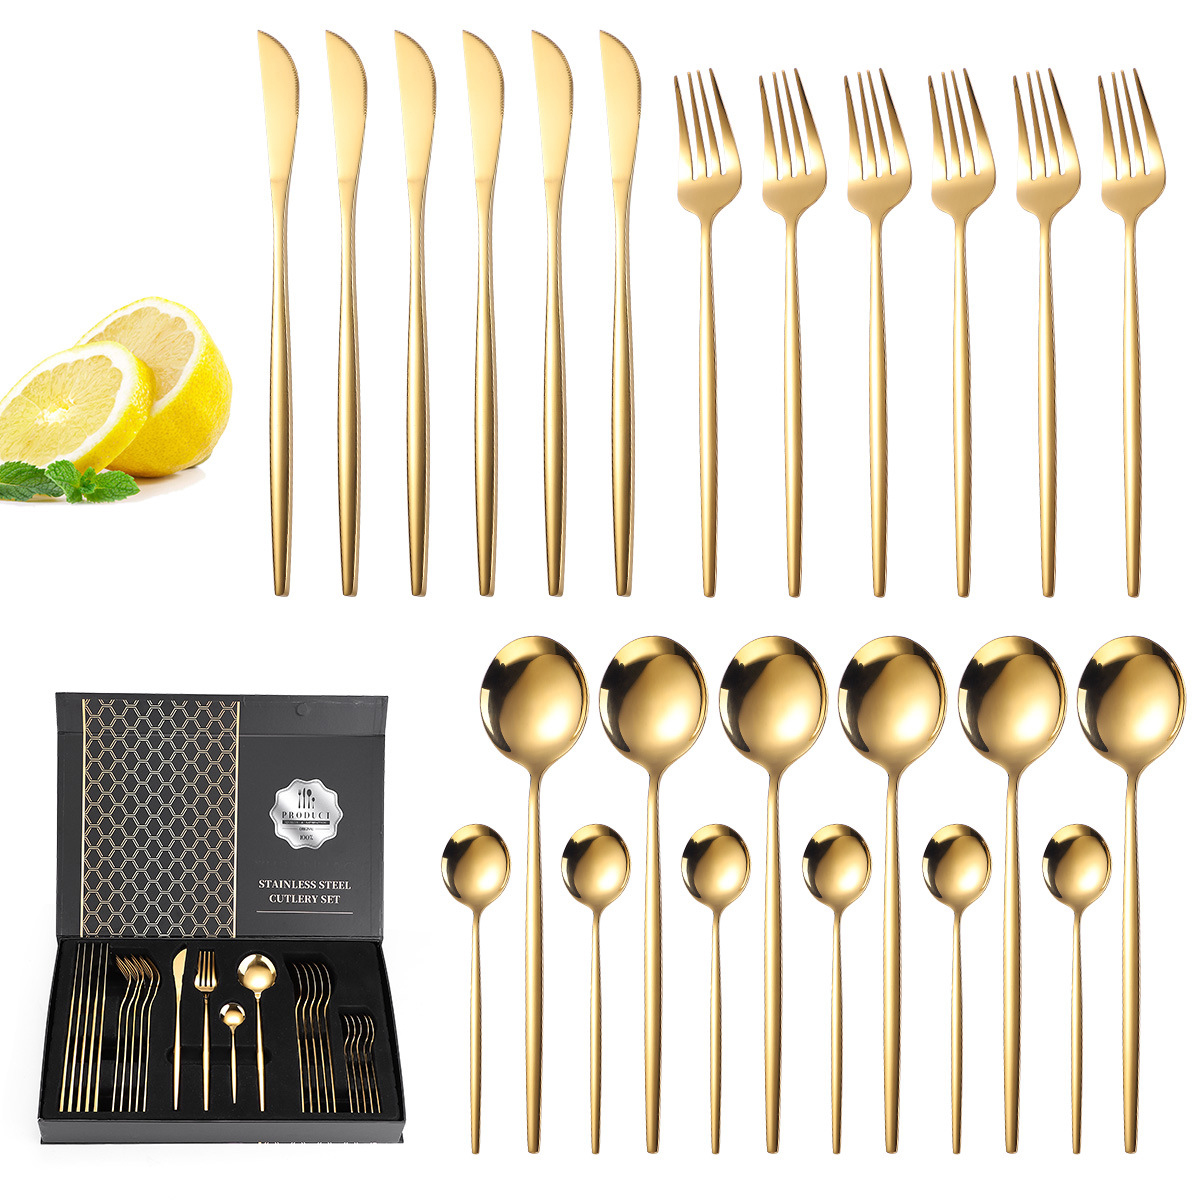 24-piece Silverware Oblate Portugal Style Flatware Restaurant Wedding Gold Stainless Steel Cutlery Set in Gift Box